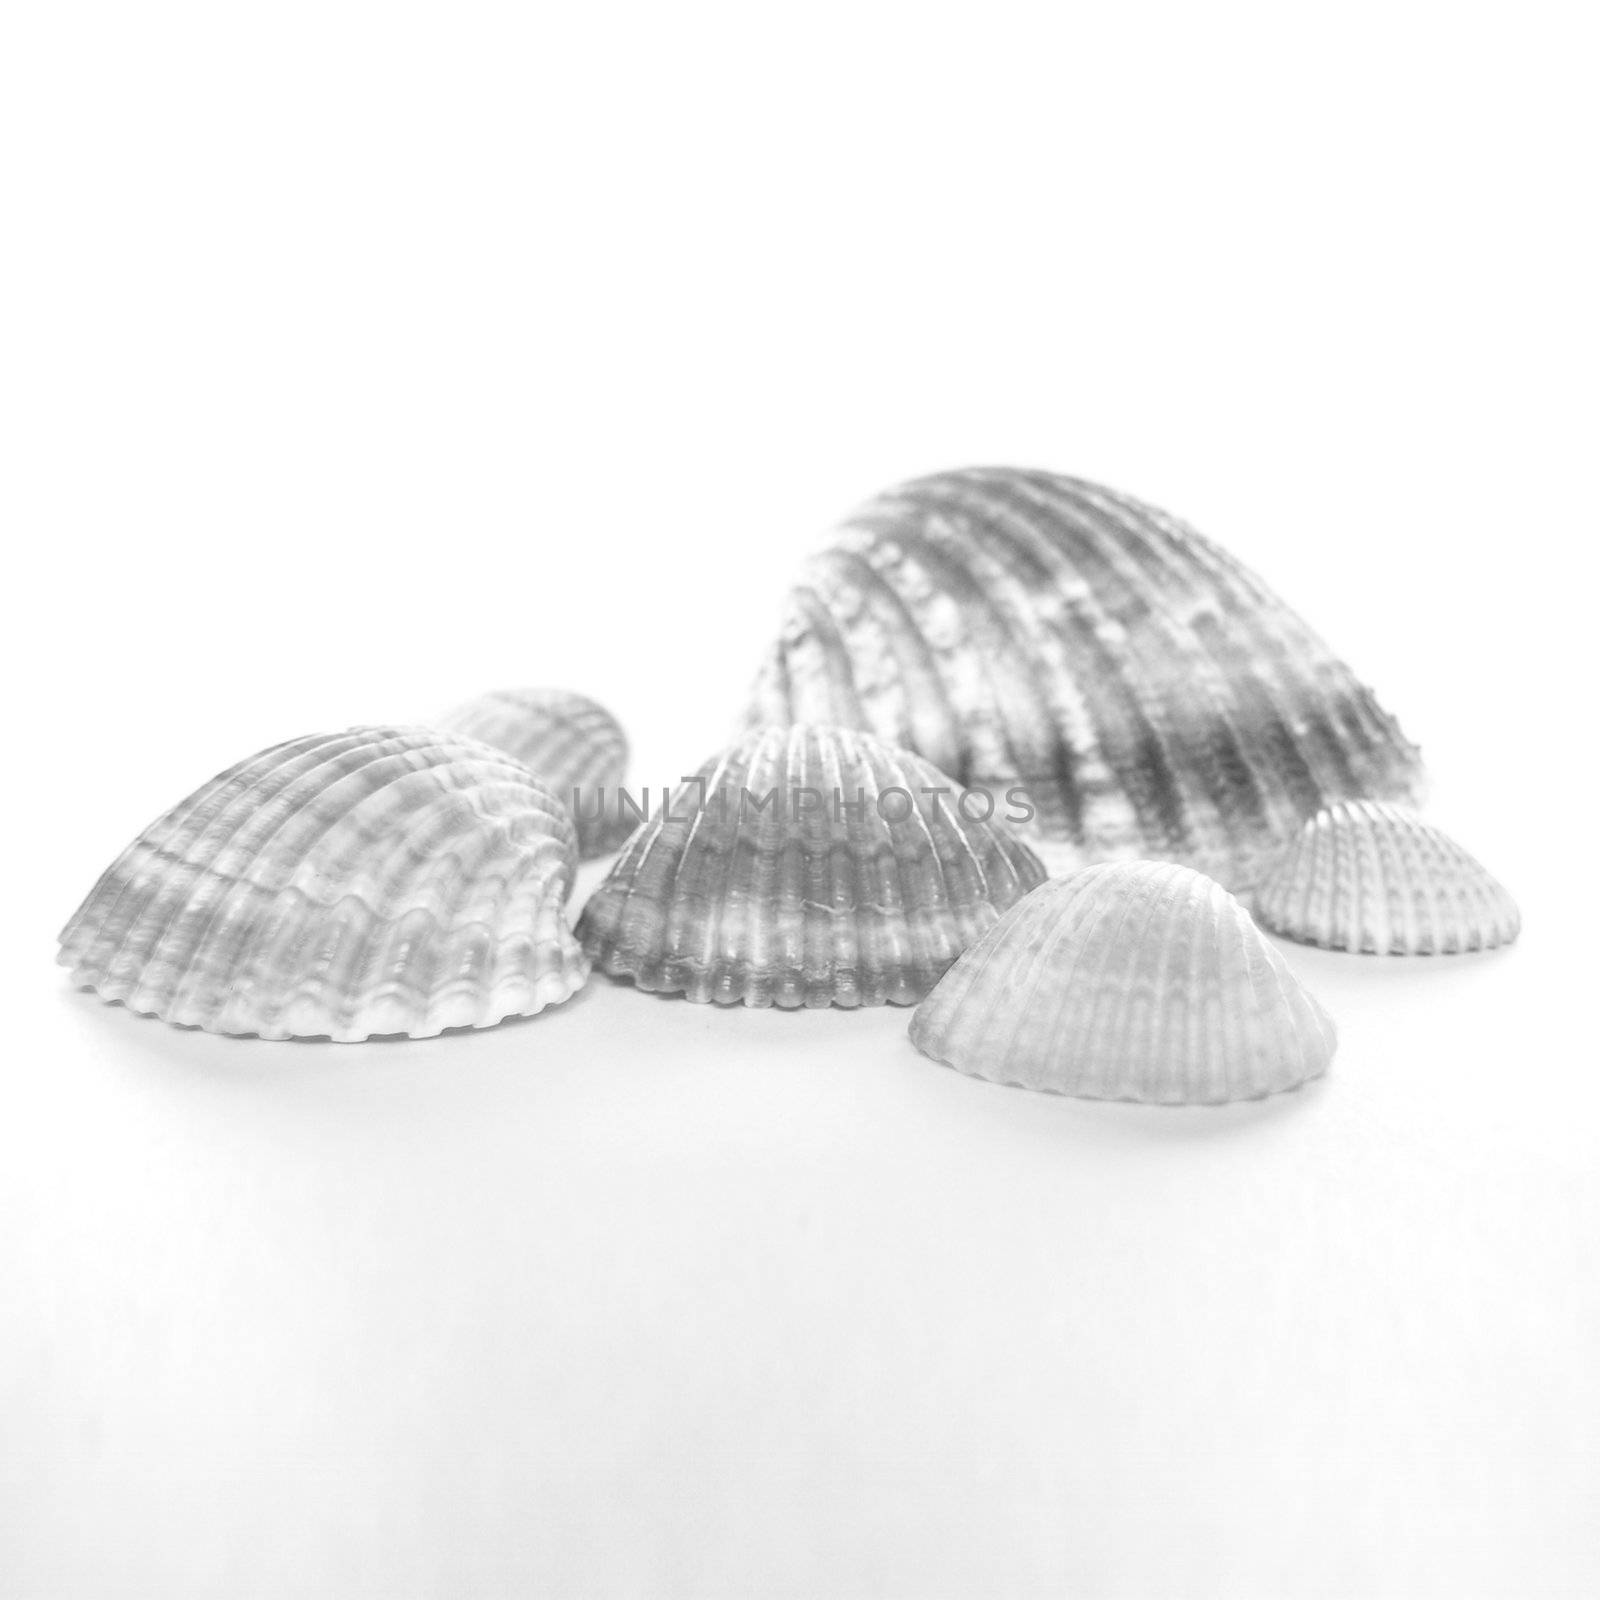 Isolated sea shell over white background